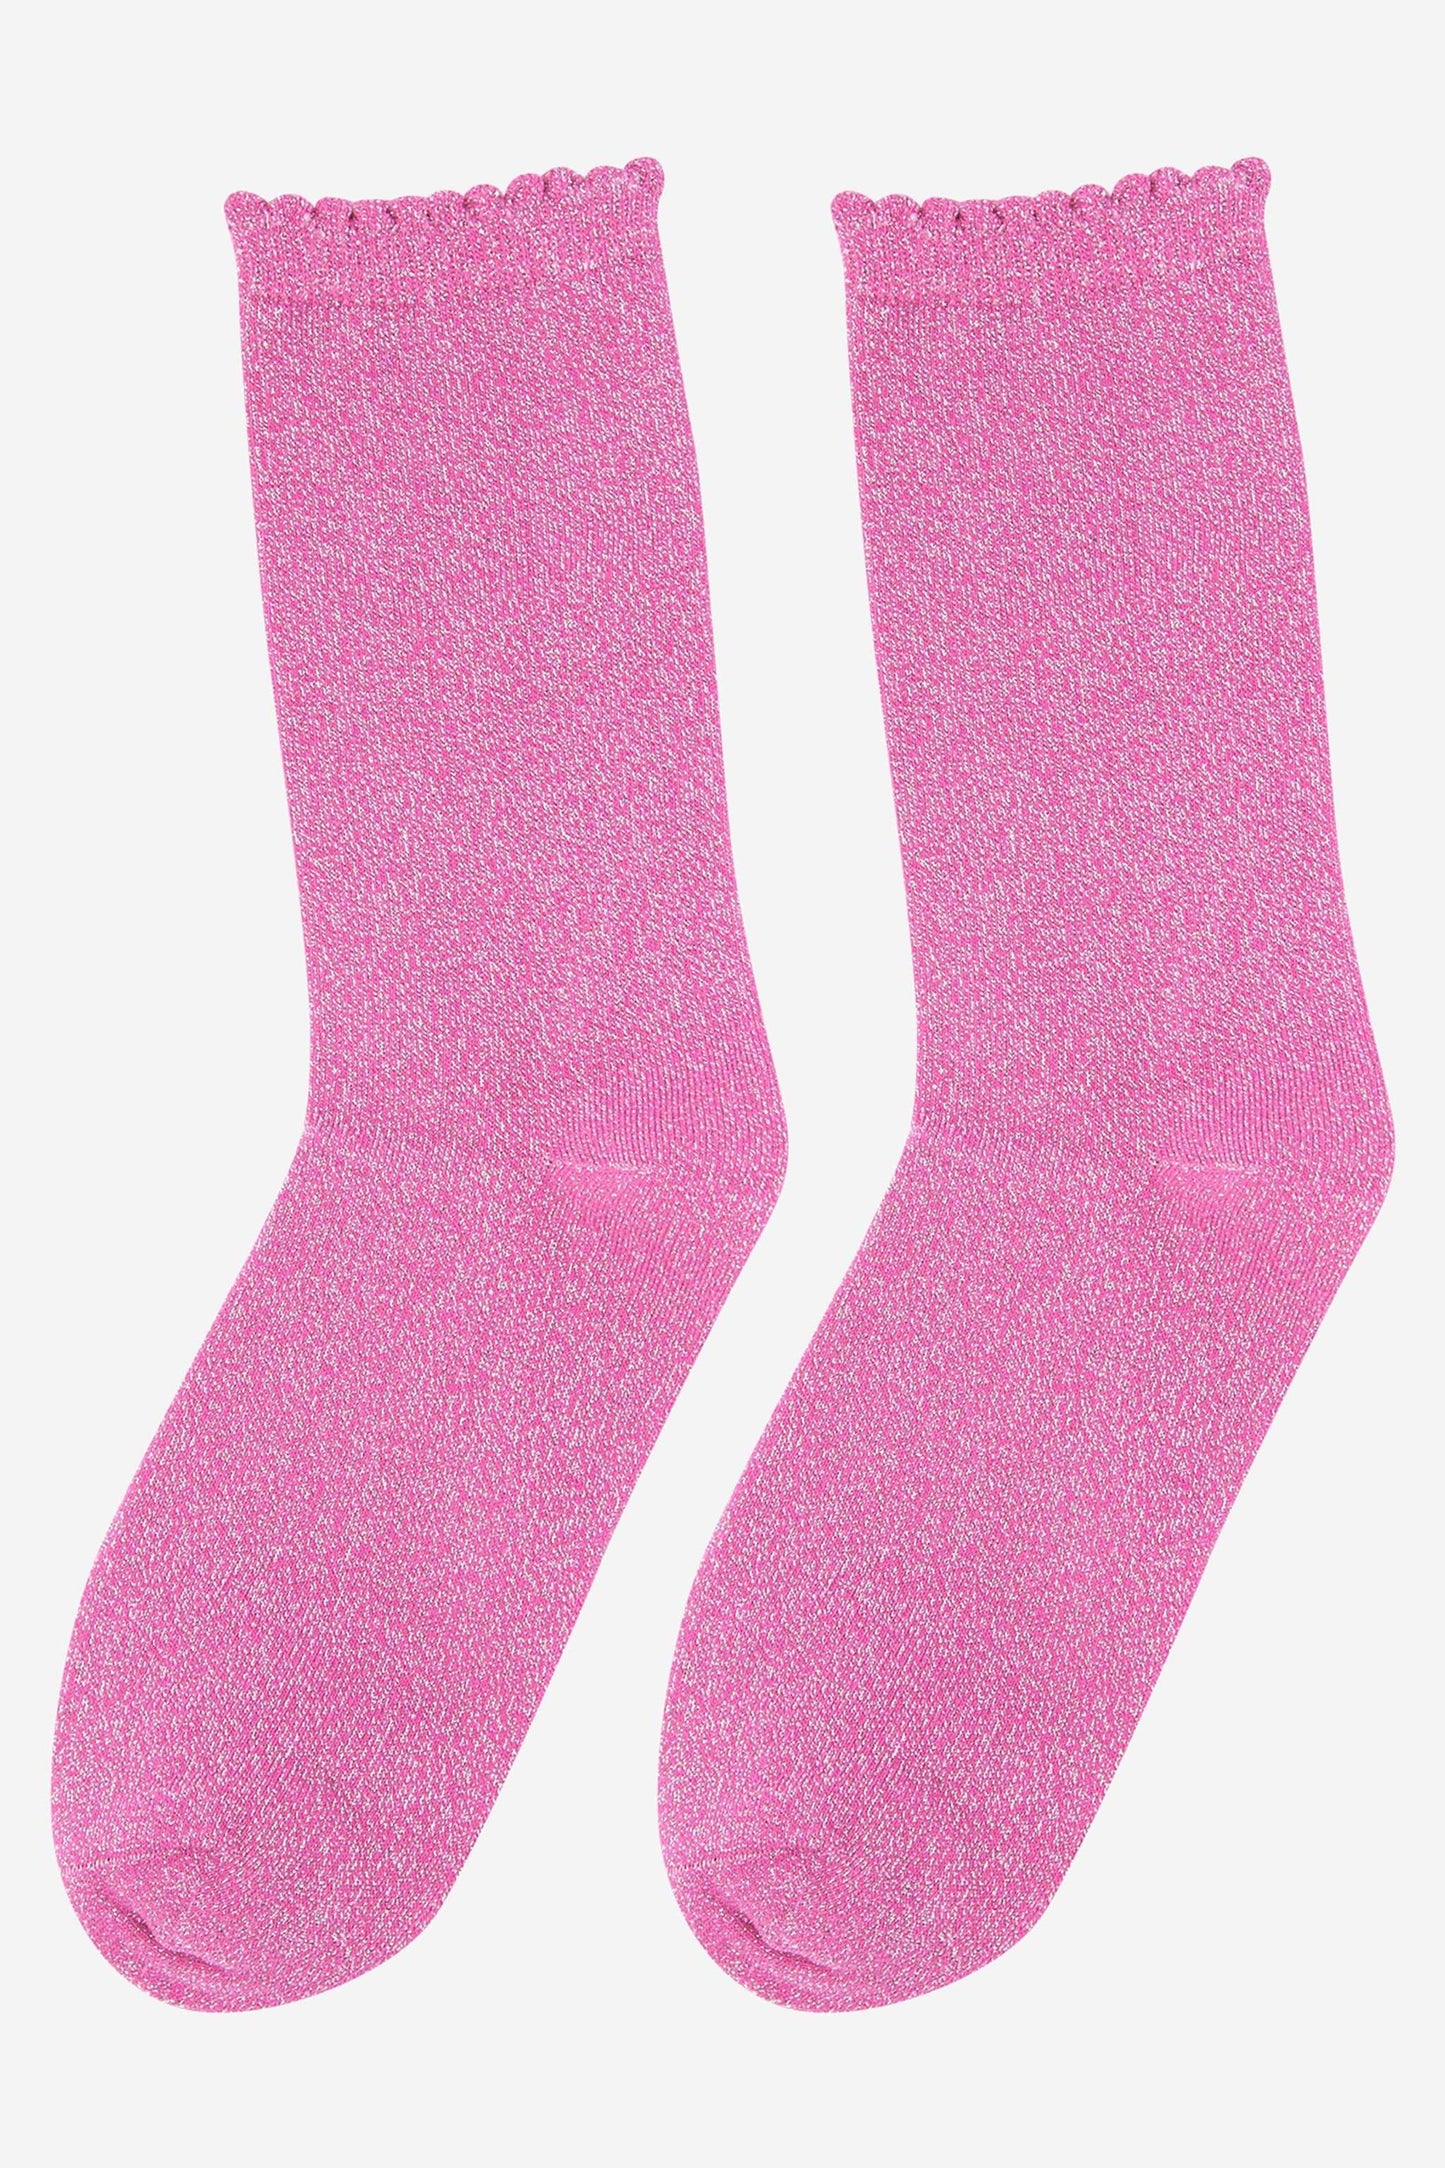 Womens Cotton Blend All Over Glitter Ankle Socks in Hot Pink - Allison's Boutique